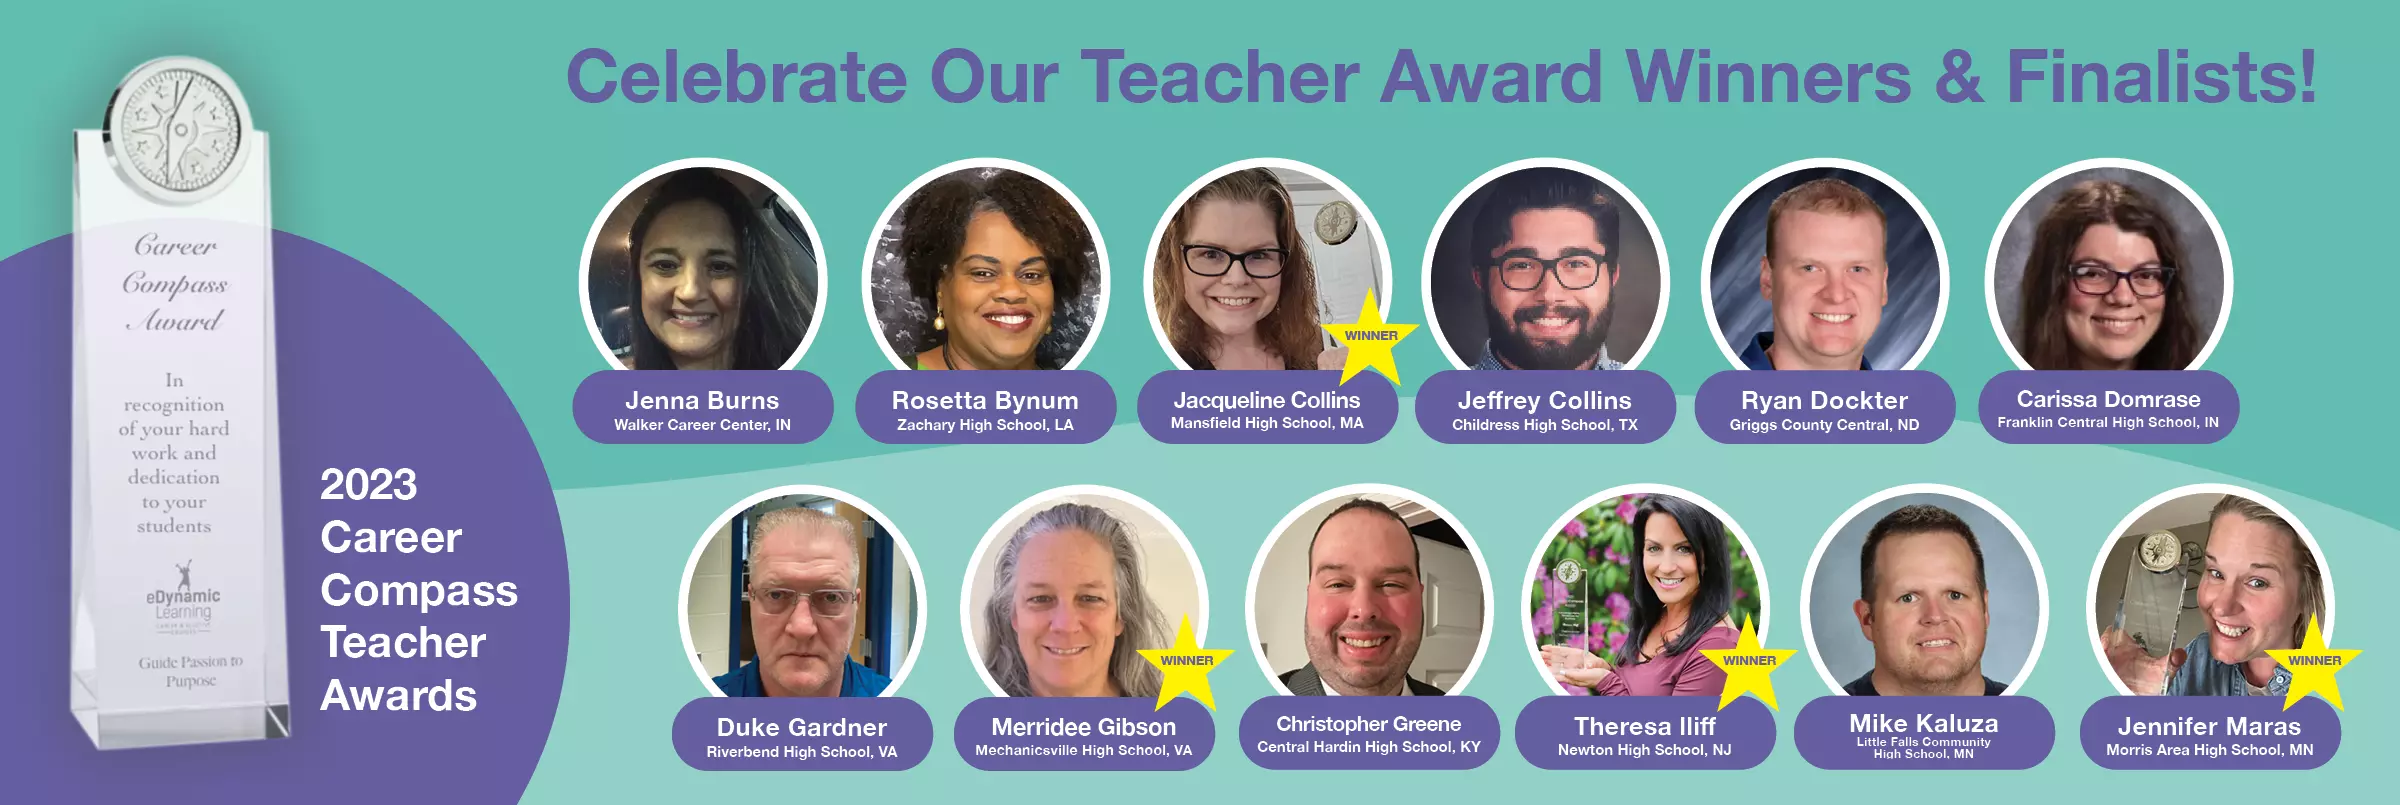 Celebrate Our Teacher Award Winners and Finalists